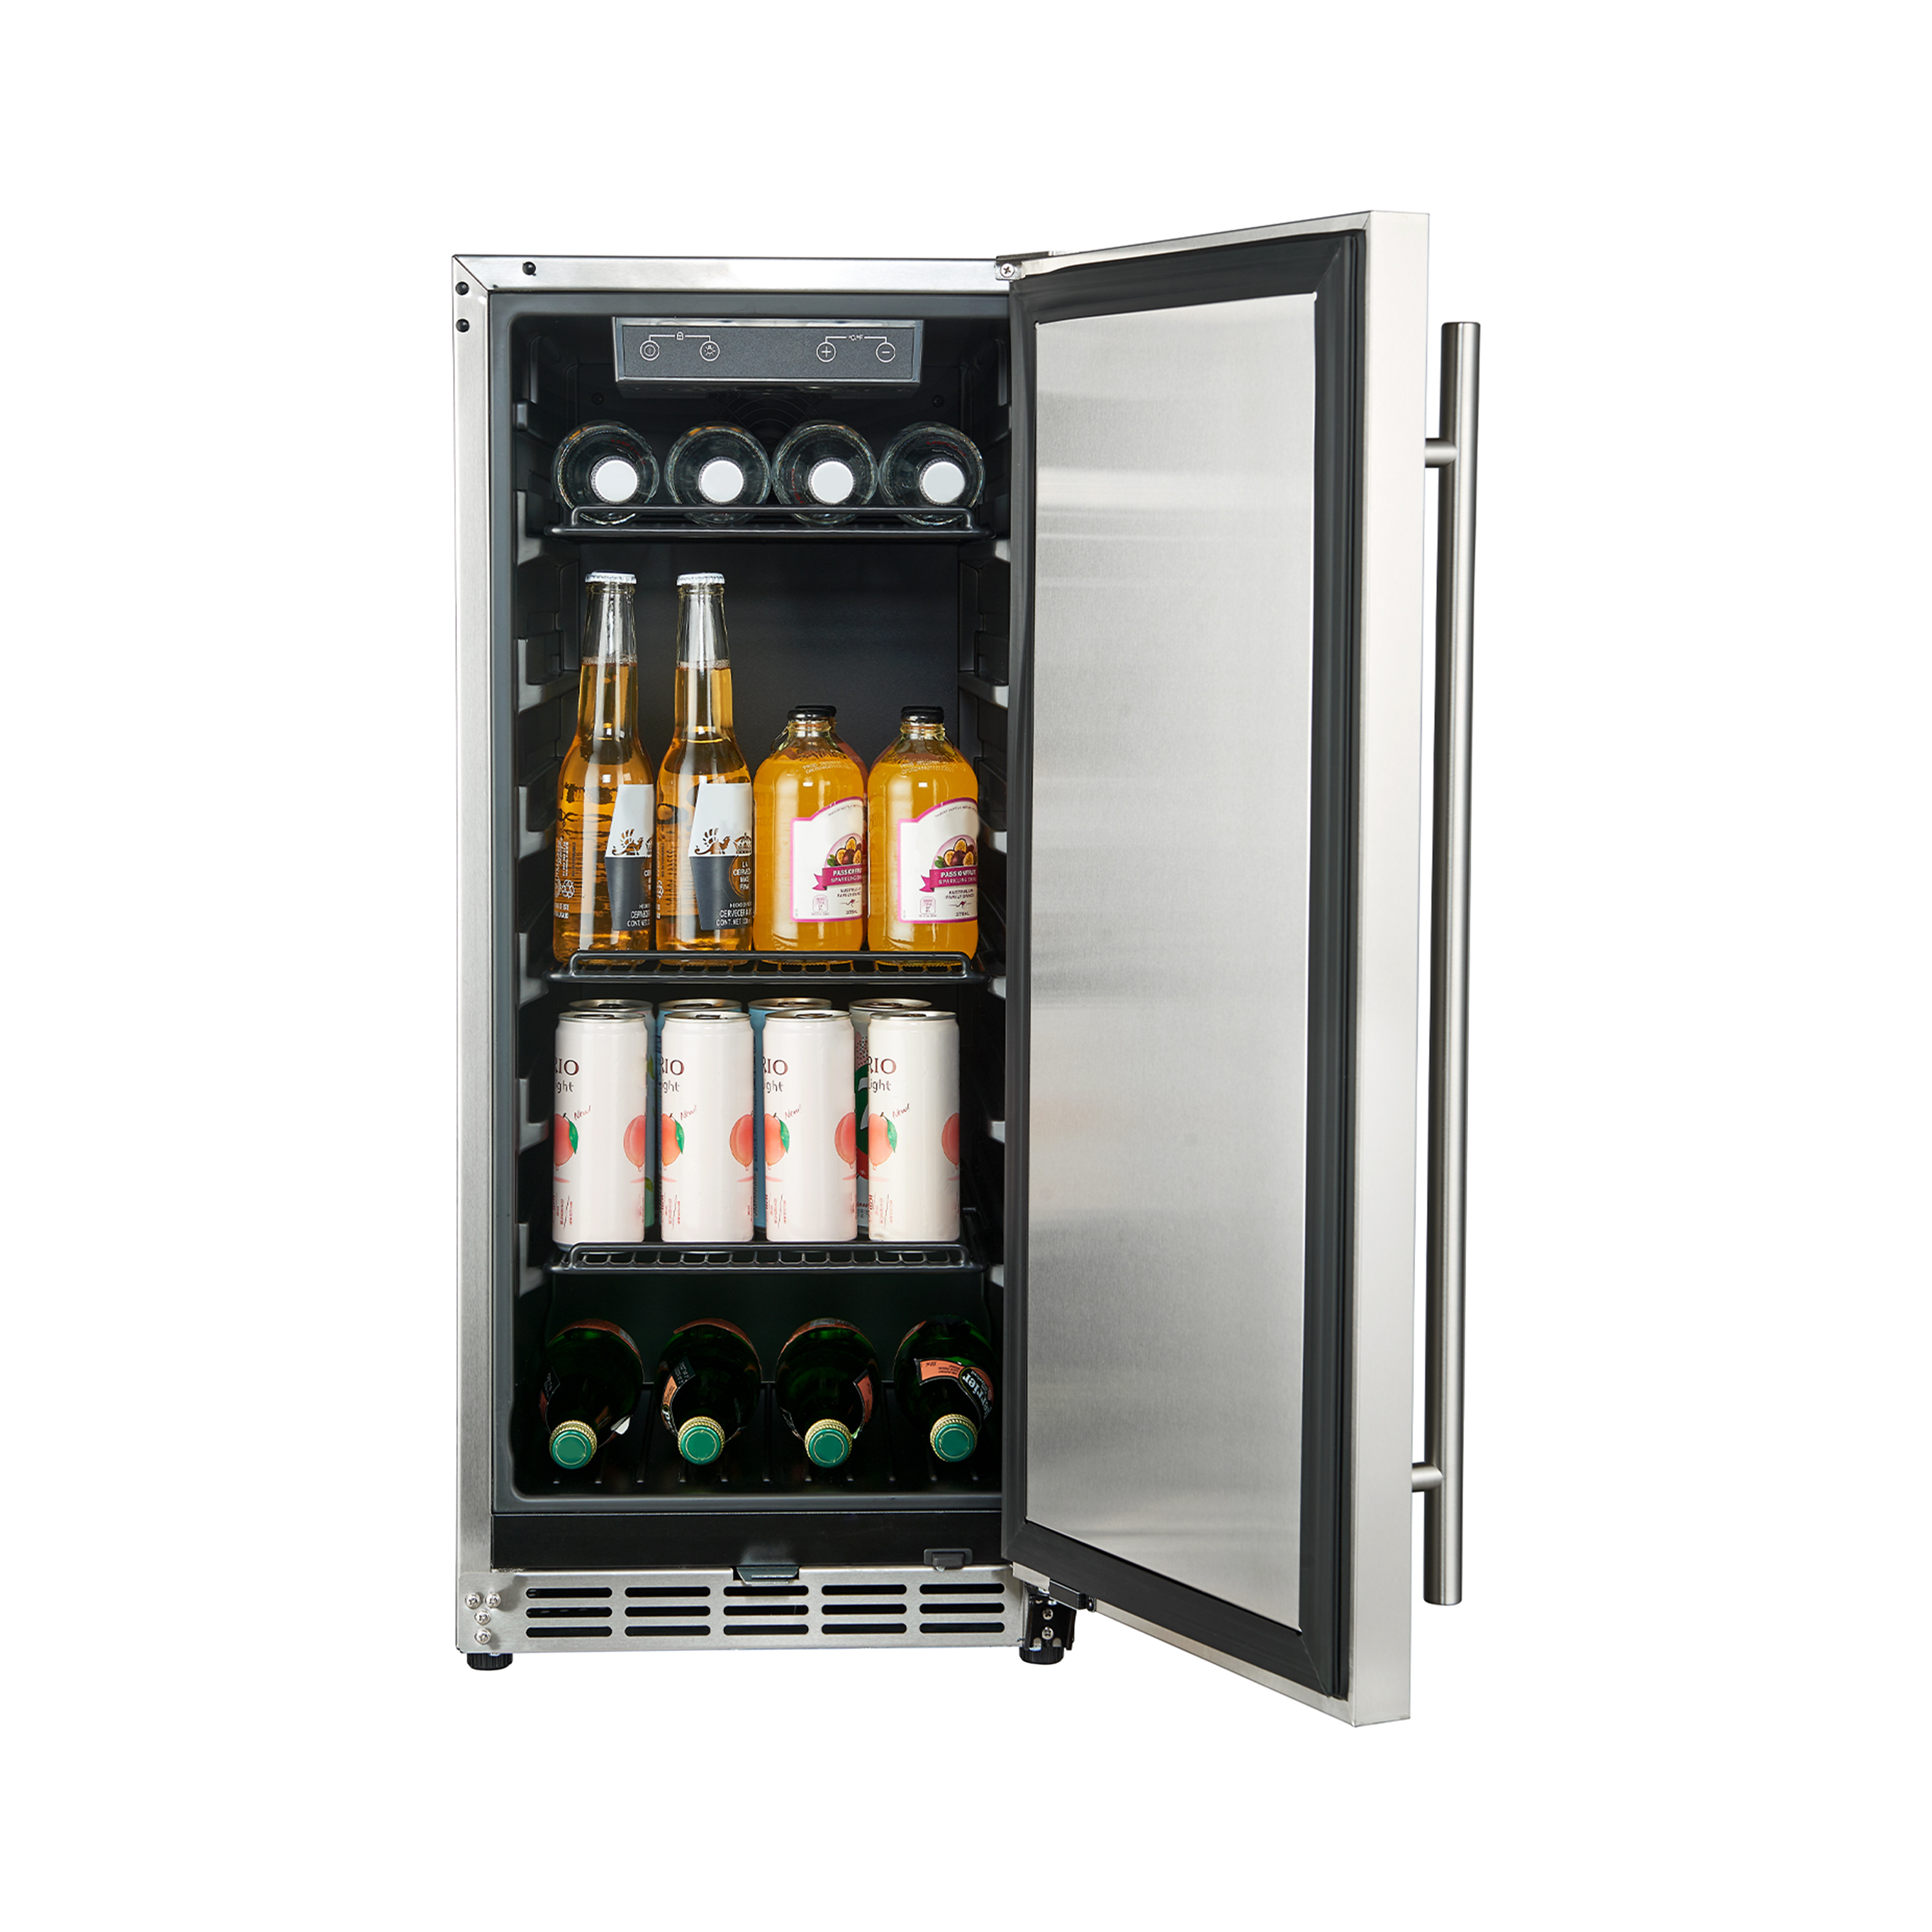 Front view of a 3.2 Cu Ft Undercounter Beverage Outdoor Refrigerator with the door open, revealing three shelves filled with beverage bottles and a digital temperature control panel